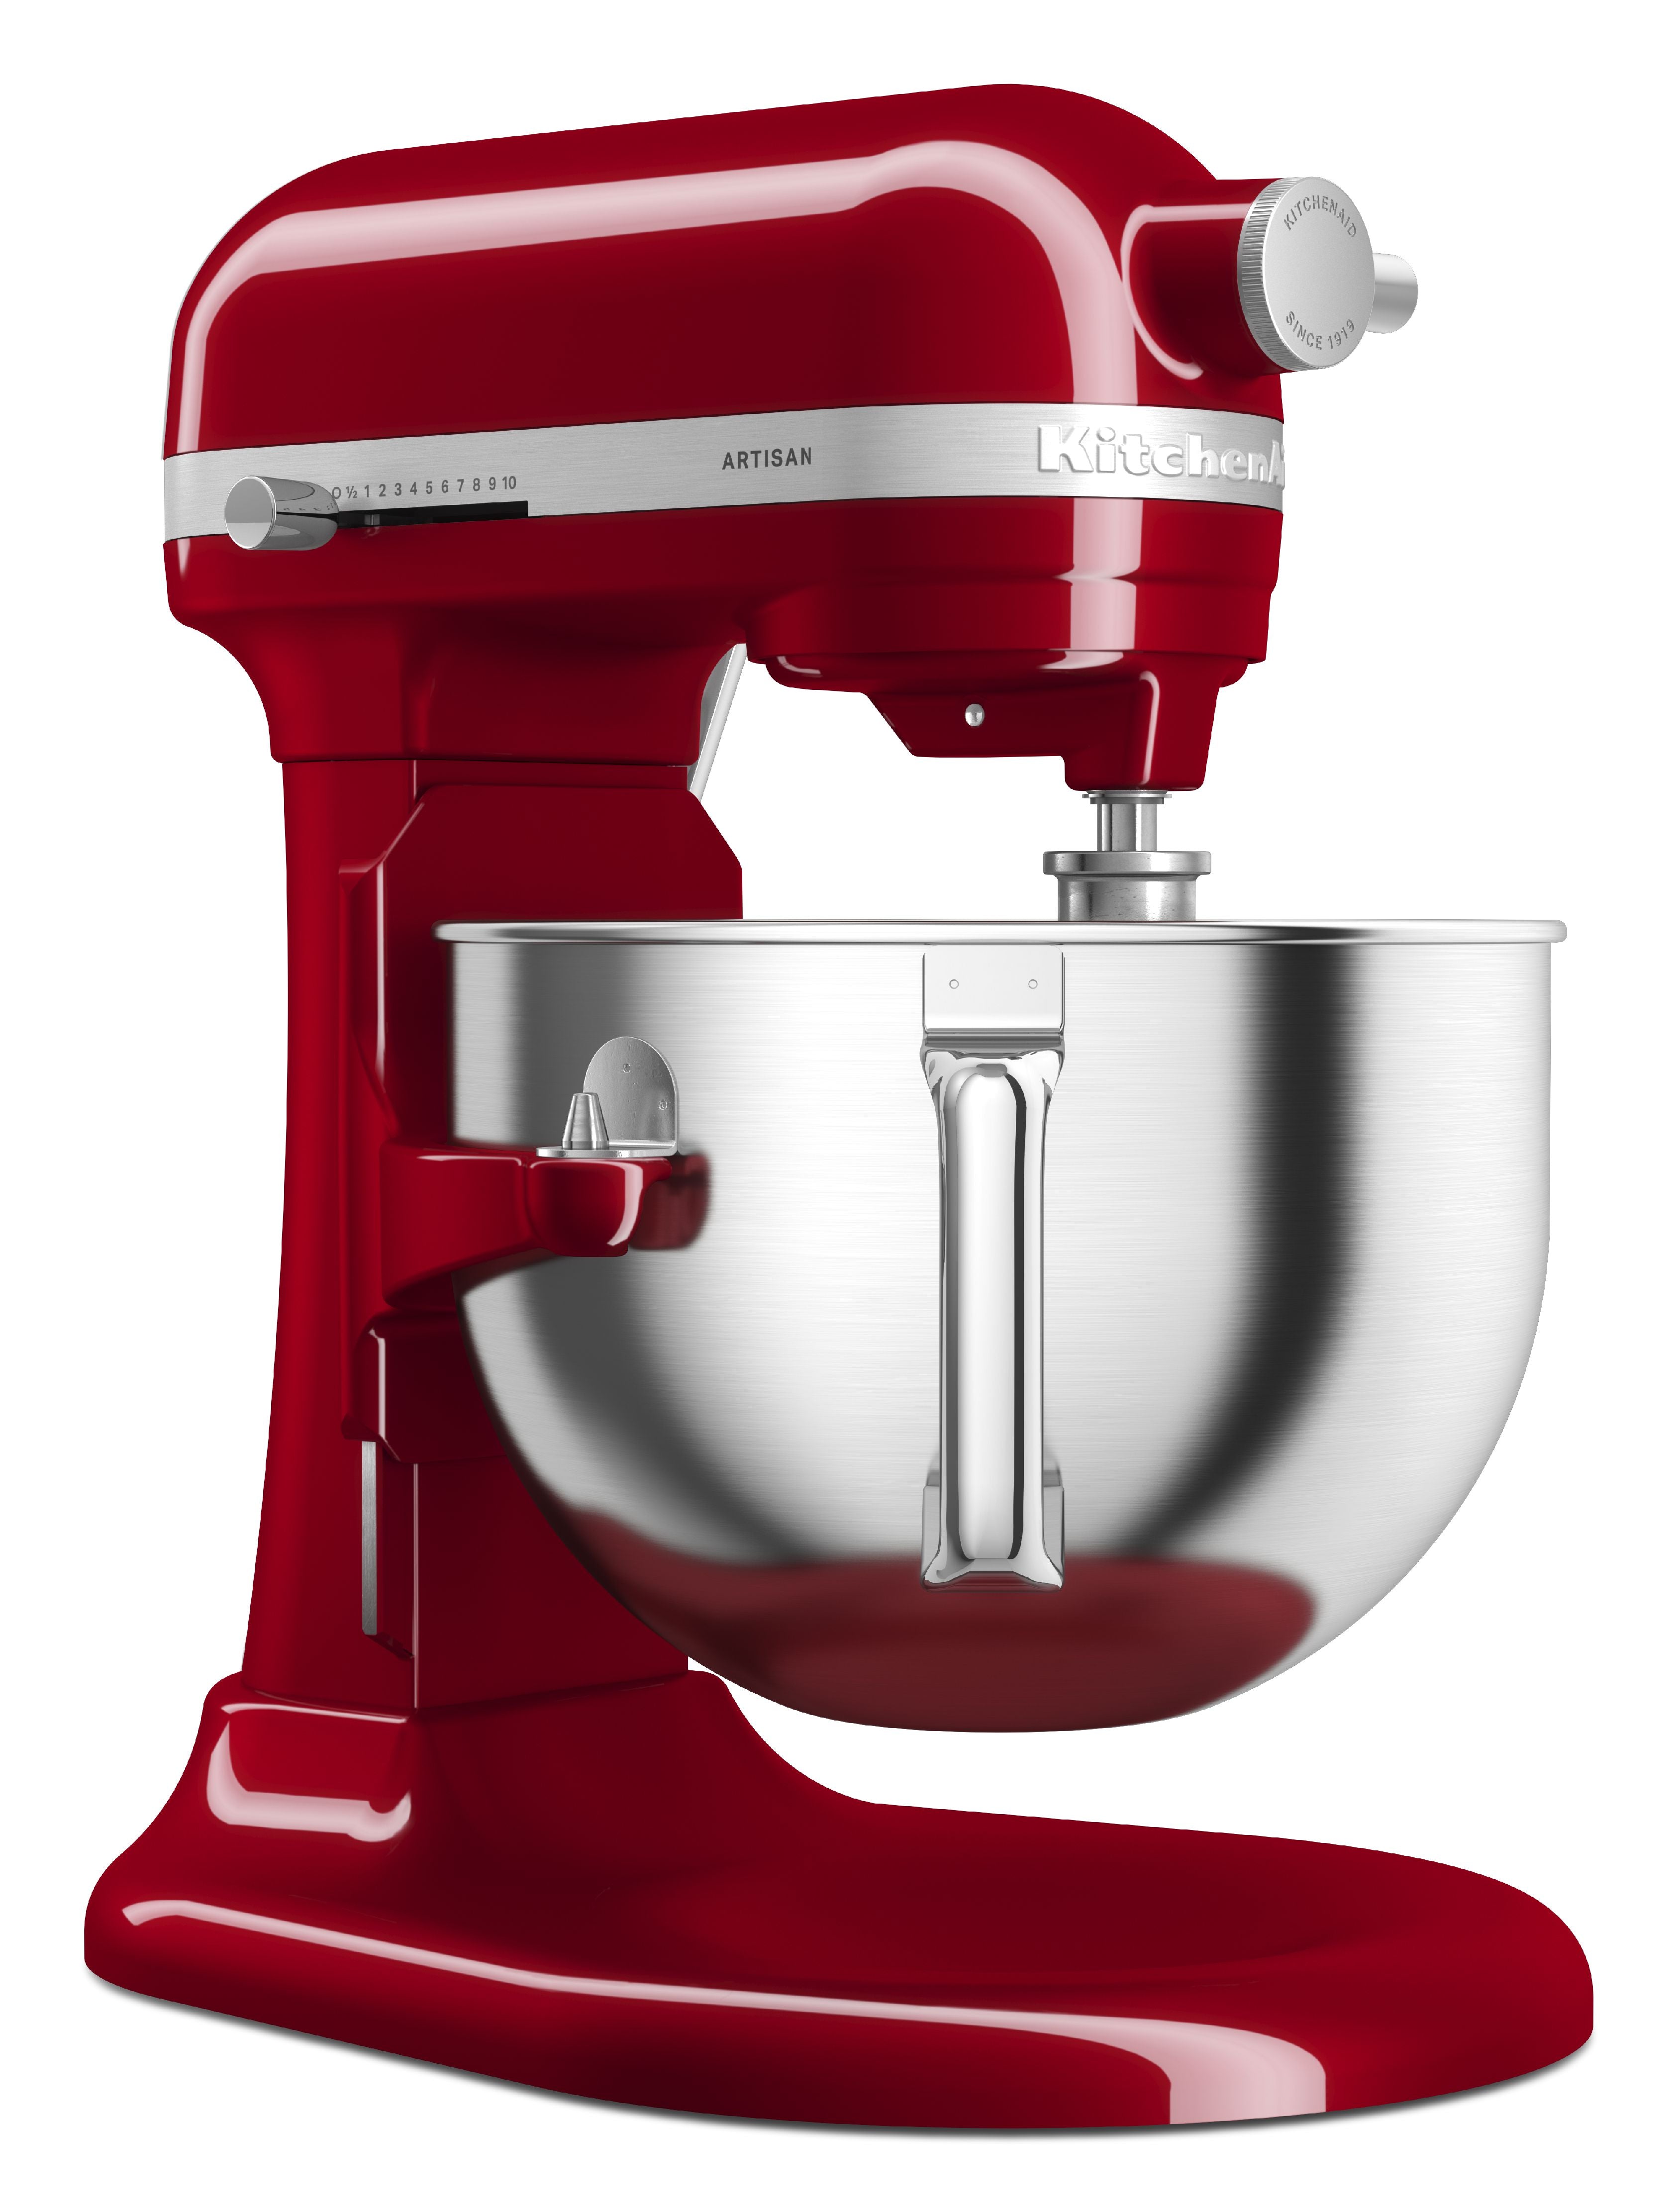 Kitchen Aid Artisan Bowl Lift Stand Mixer 5.6 L, Empire Red